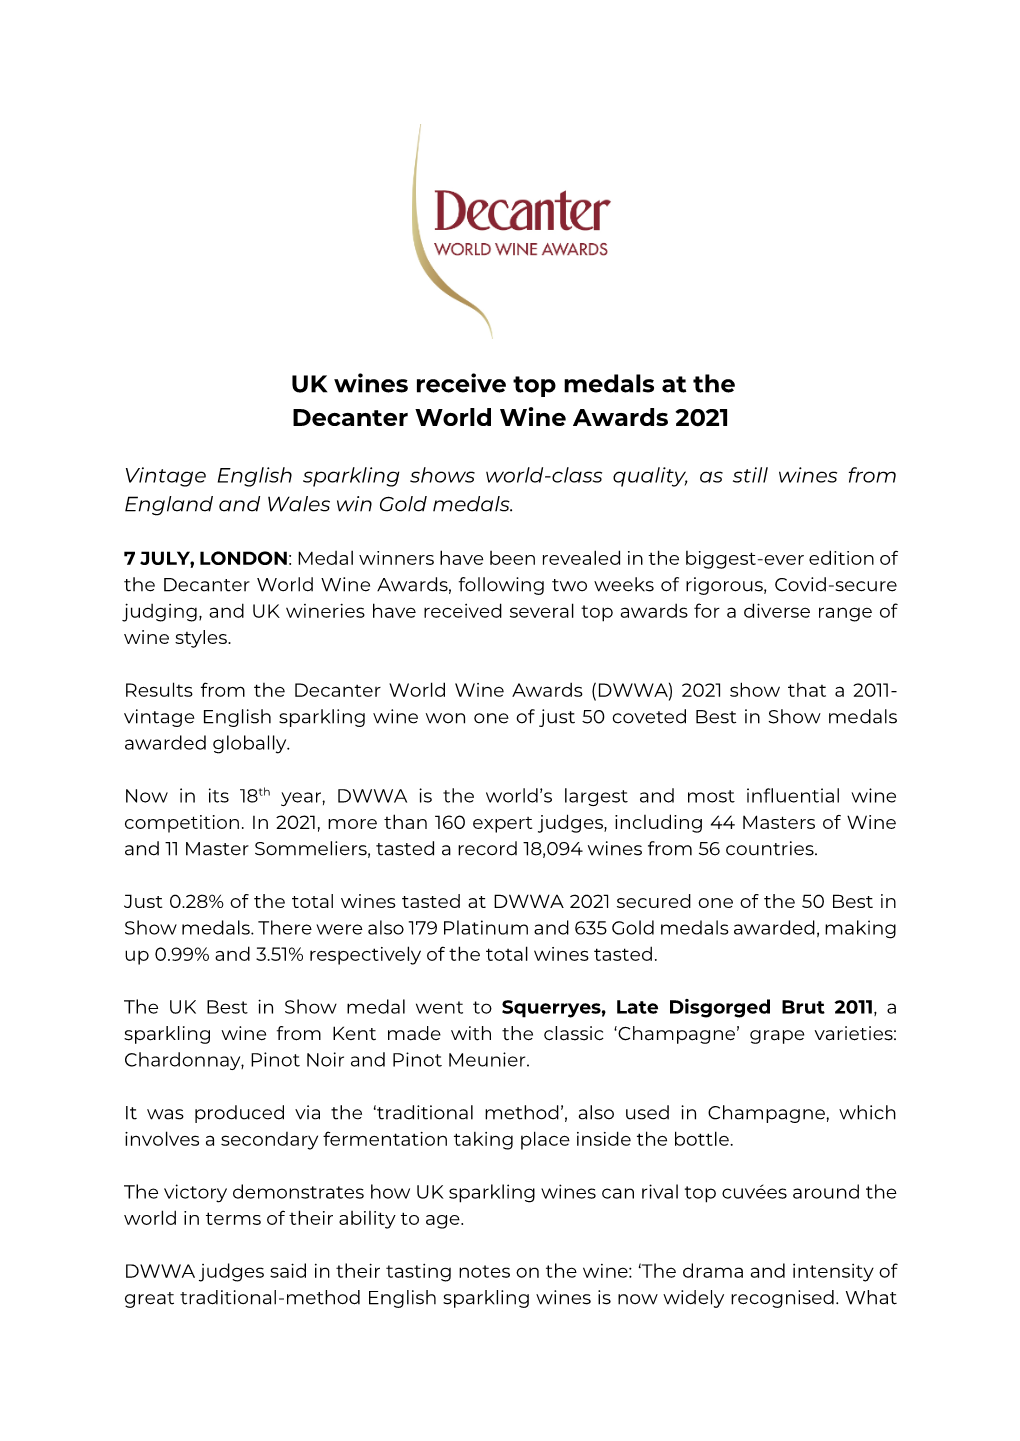 UK Wines Receive Top Medals at the Decanter World Wine Awards 2021